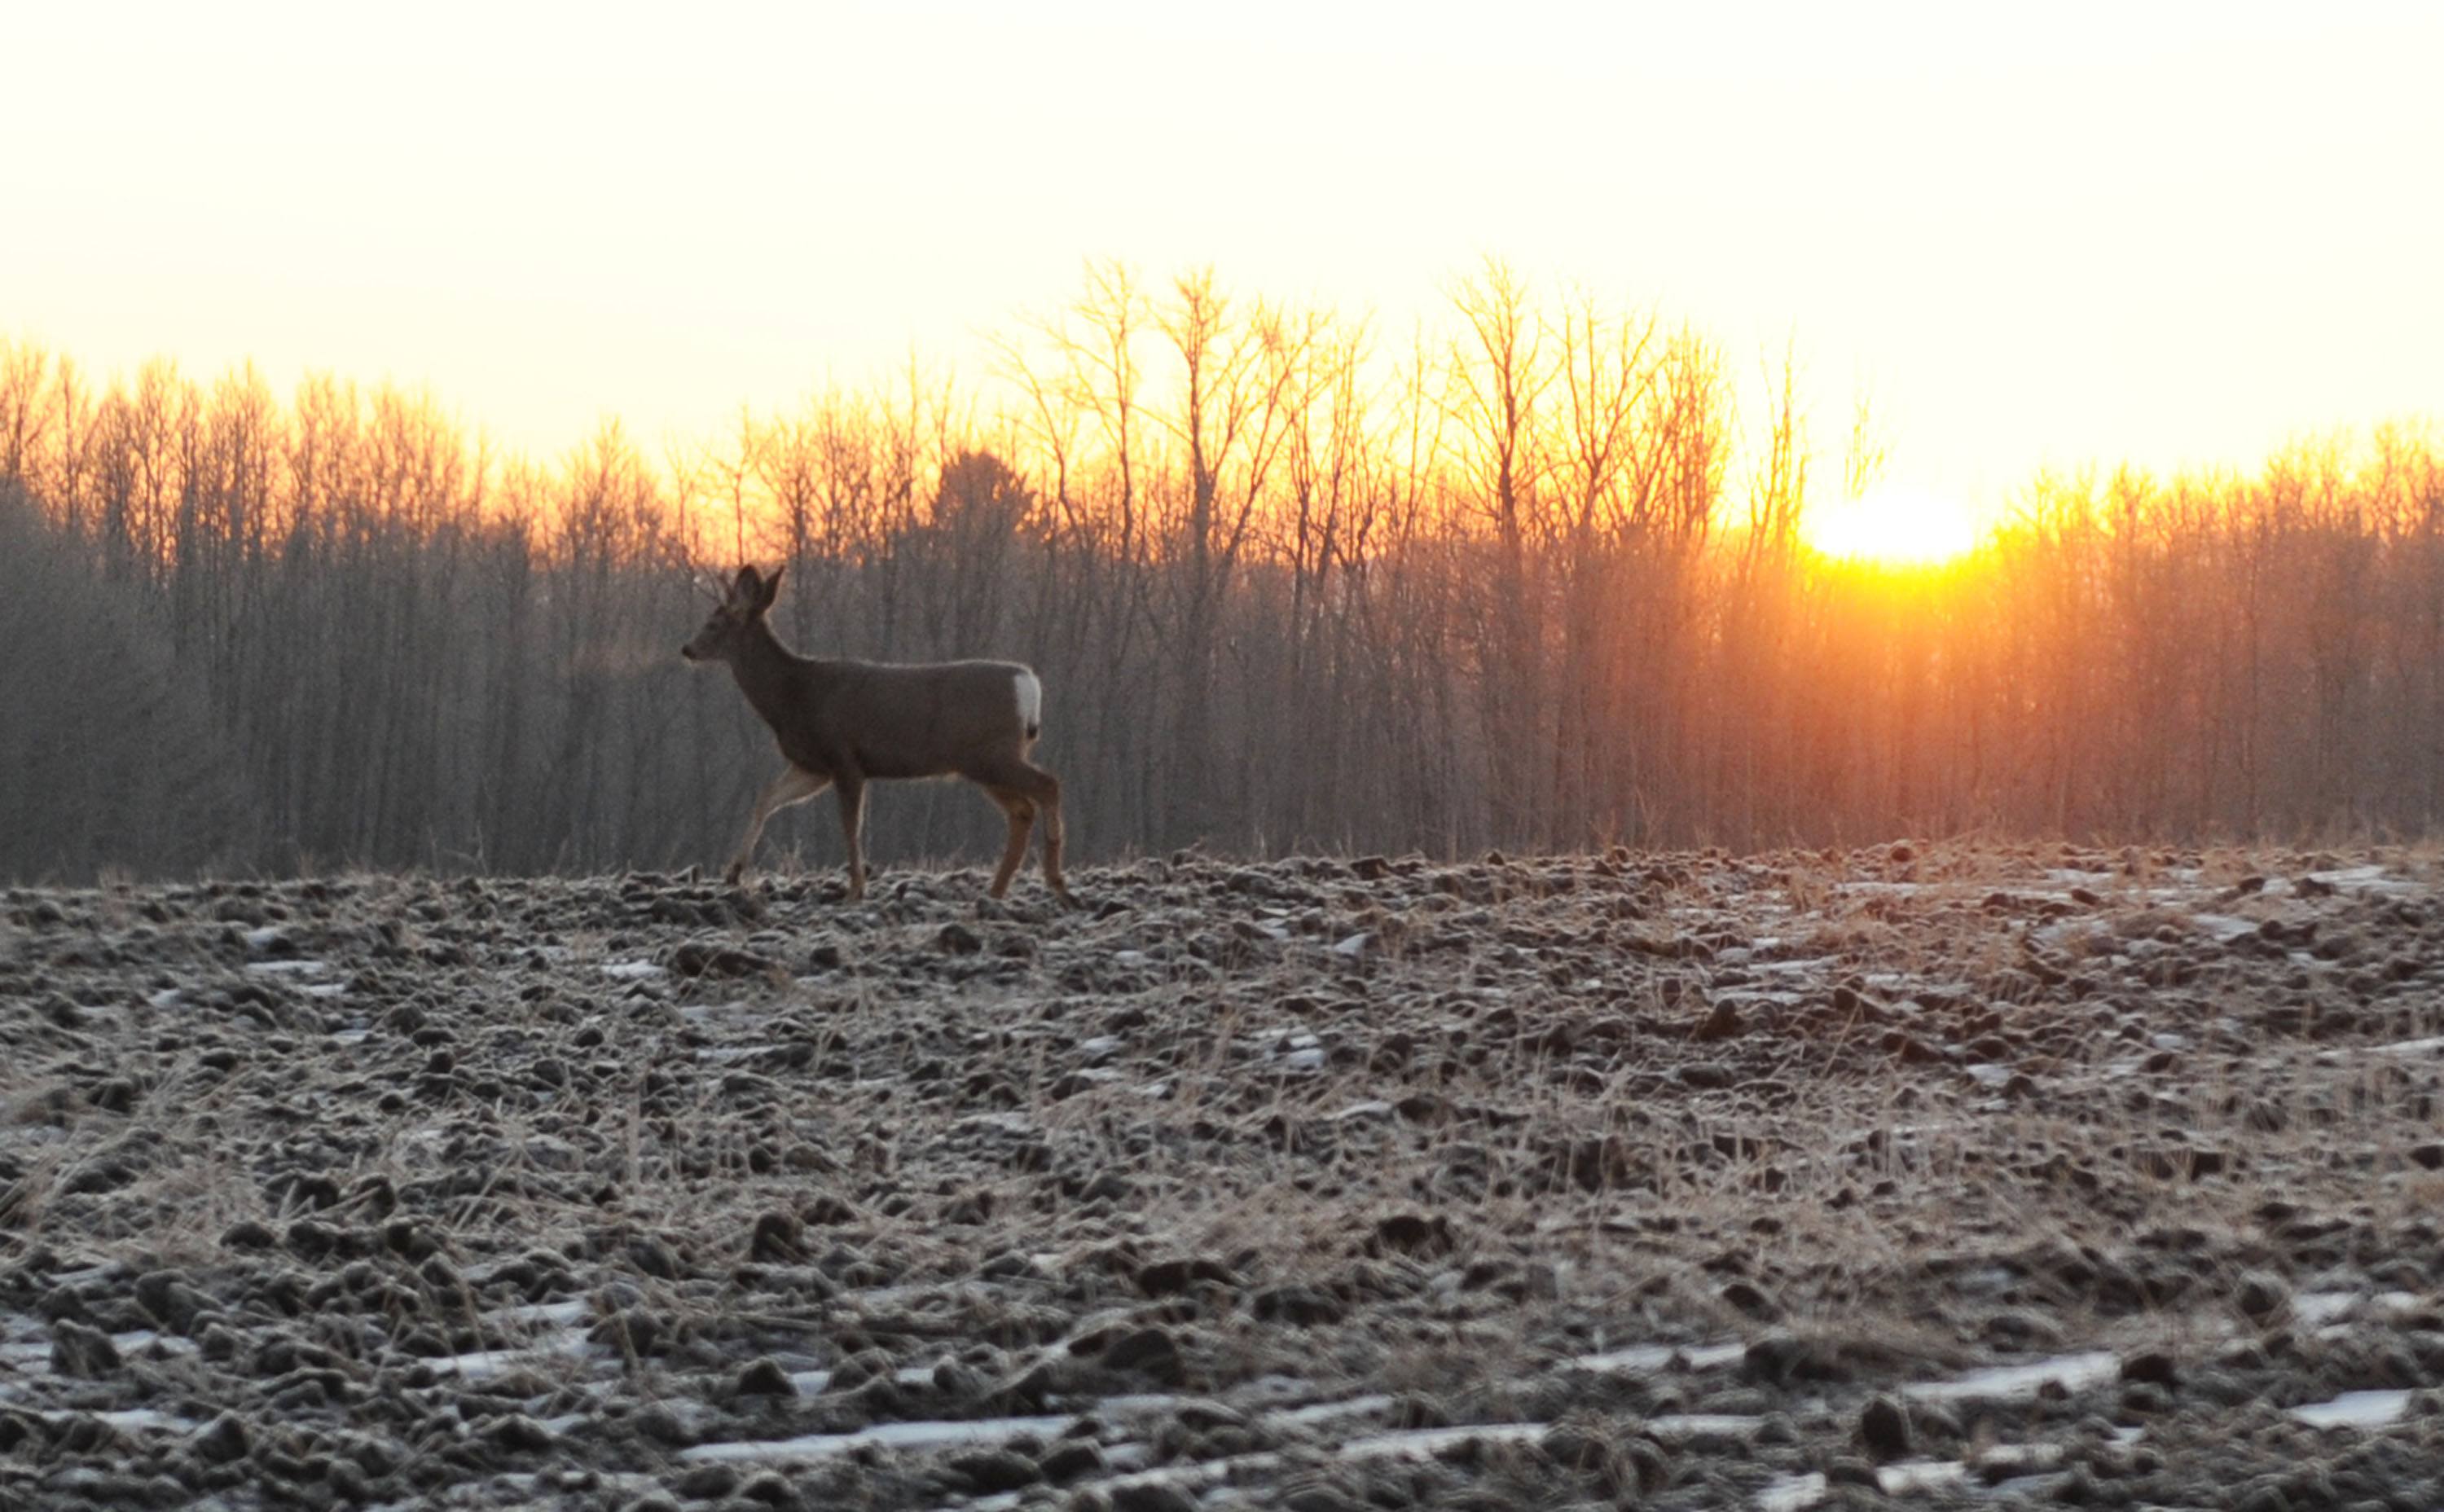 SUN RISE- A deer walks across a county field recently looking for food in the morning light.